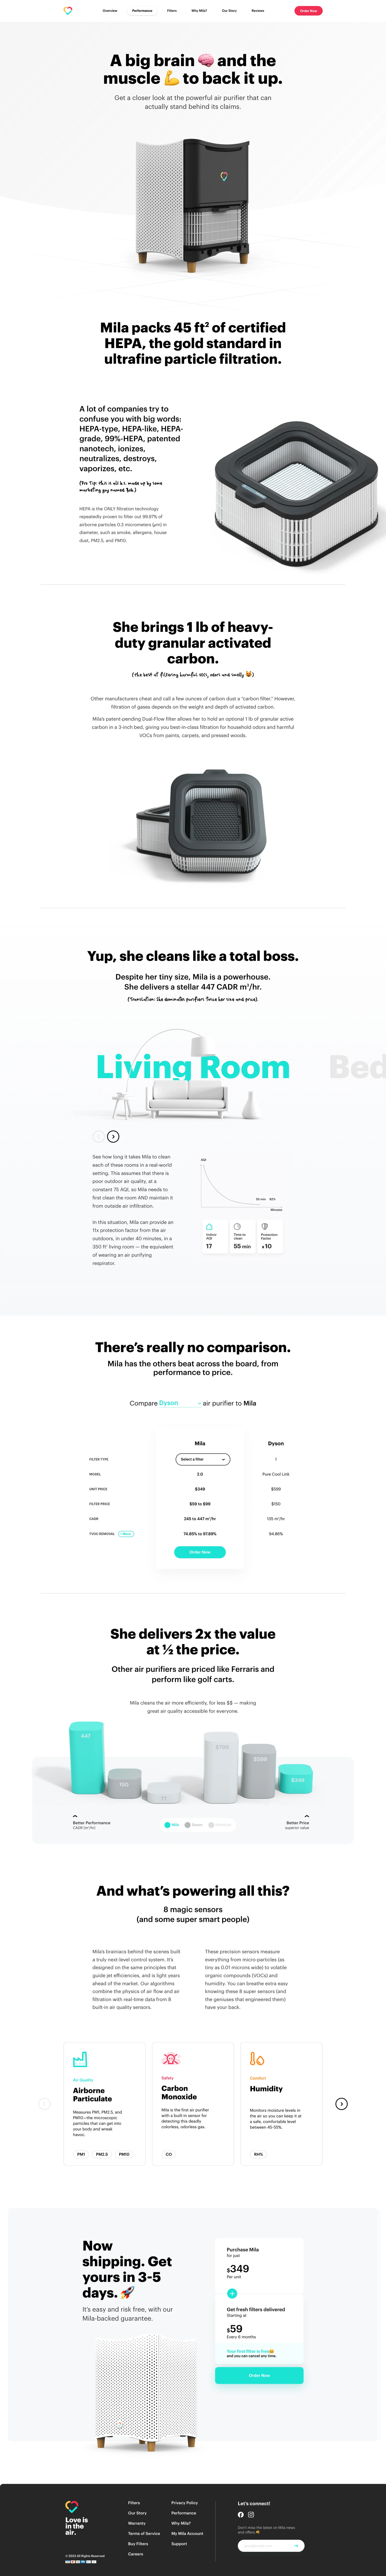 Mila Cares Landing Page Example: Air breathers, rejoice. Meet Mila, the first air purifier designed with real, air-breathing humans in mind.